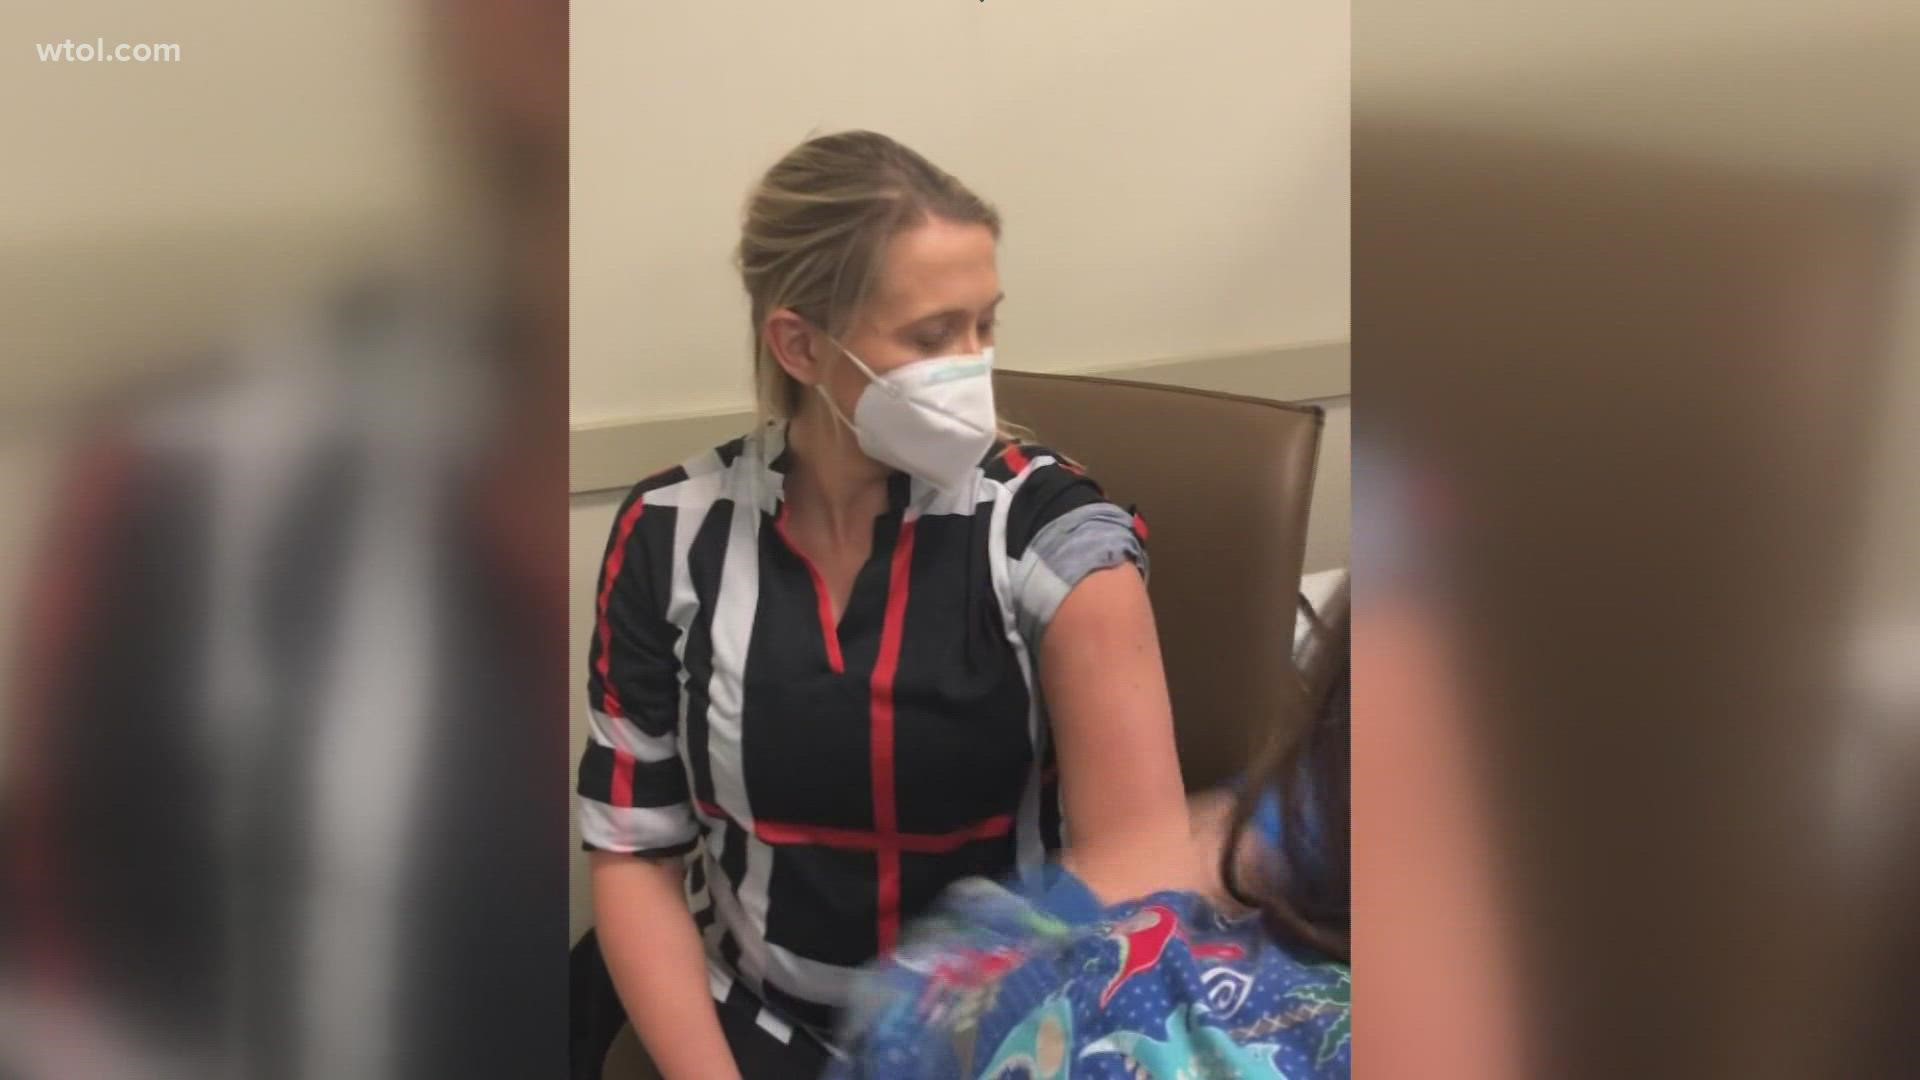 Dr. Kathryn Davis got vaccinated while pregnant. Now her son has positive IgG antibodies to COVID, meaning he has a strong level of protection against the virus.